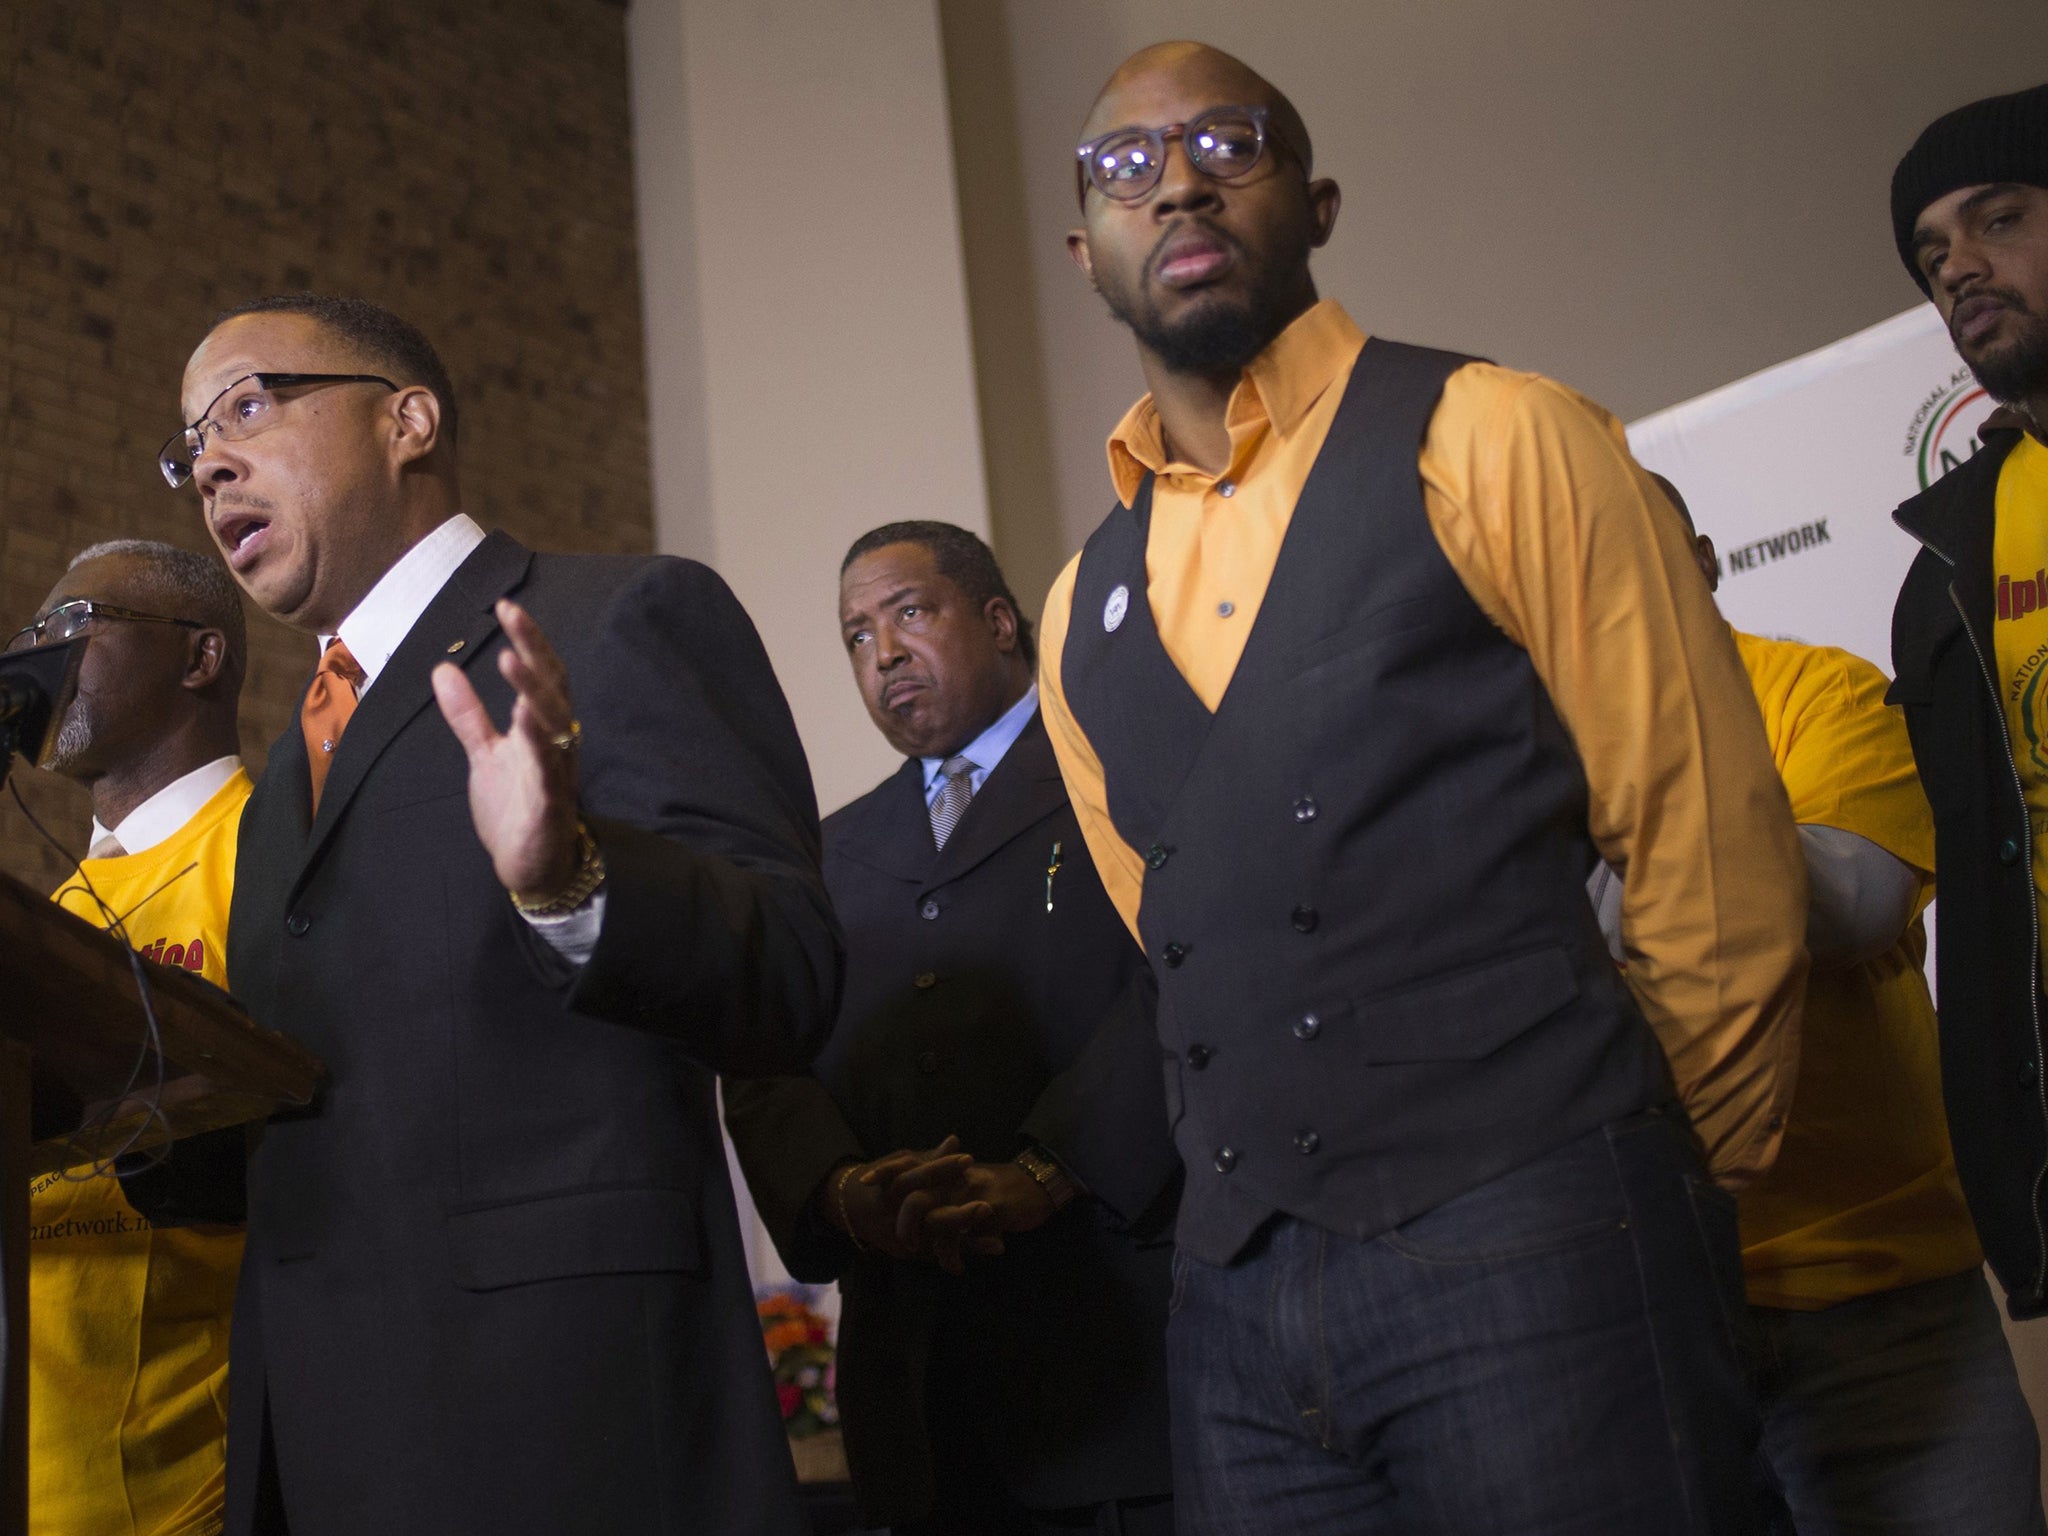 Michael Brown's family attorney Anthony Gray (L) speaks during an announcement for Justice Disciple volunteers